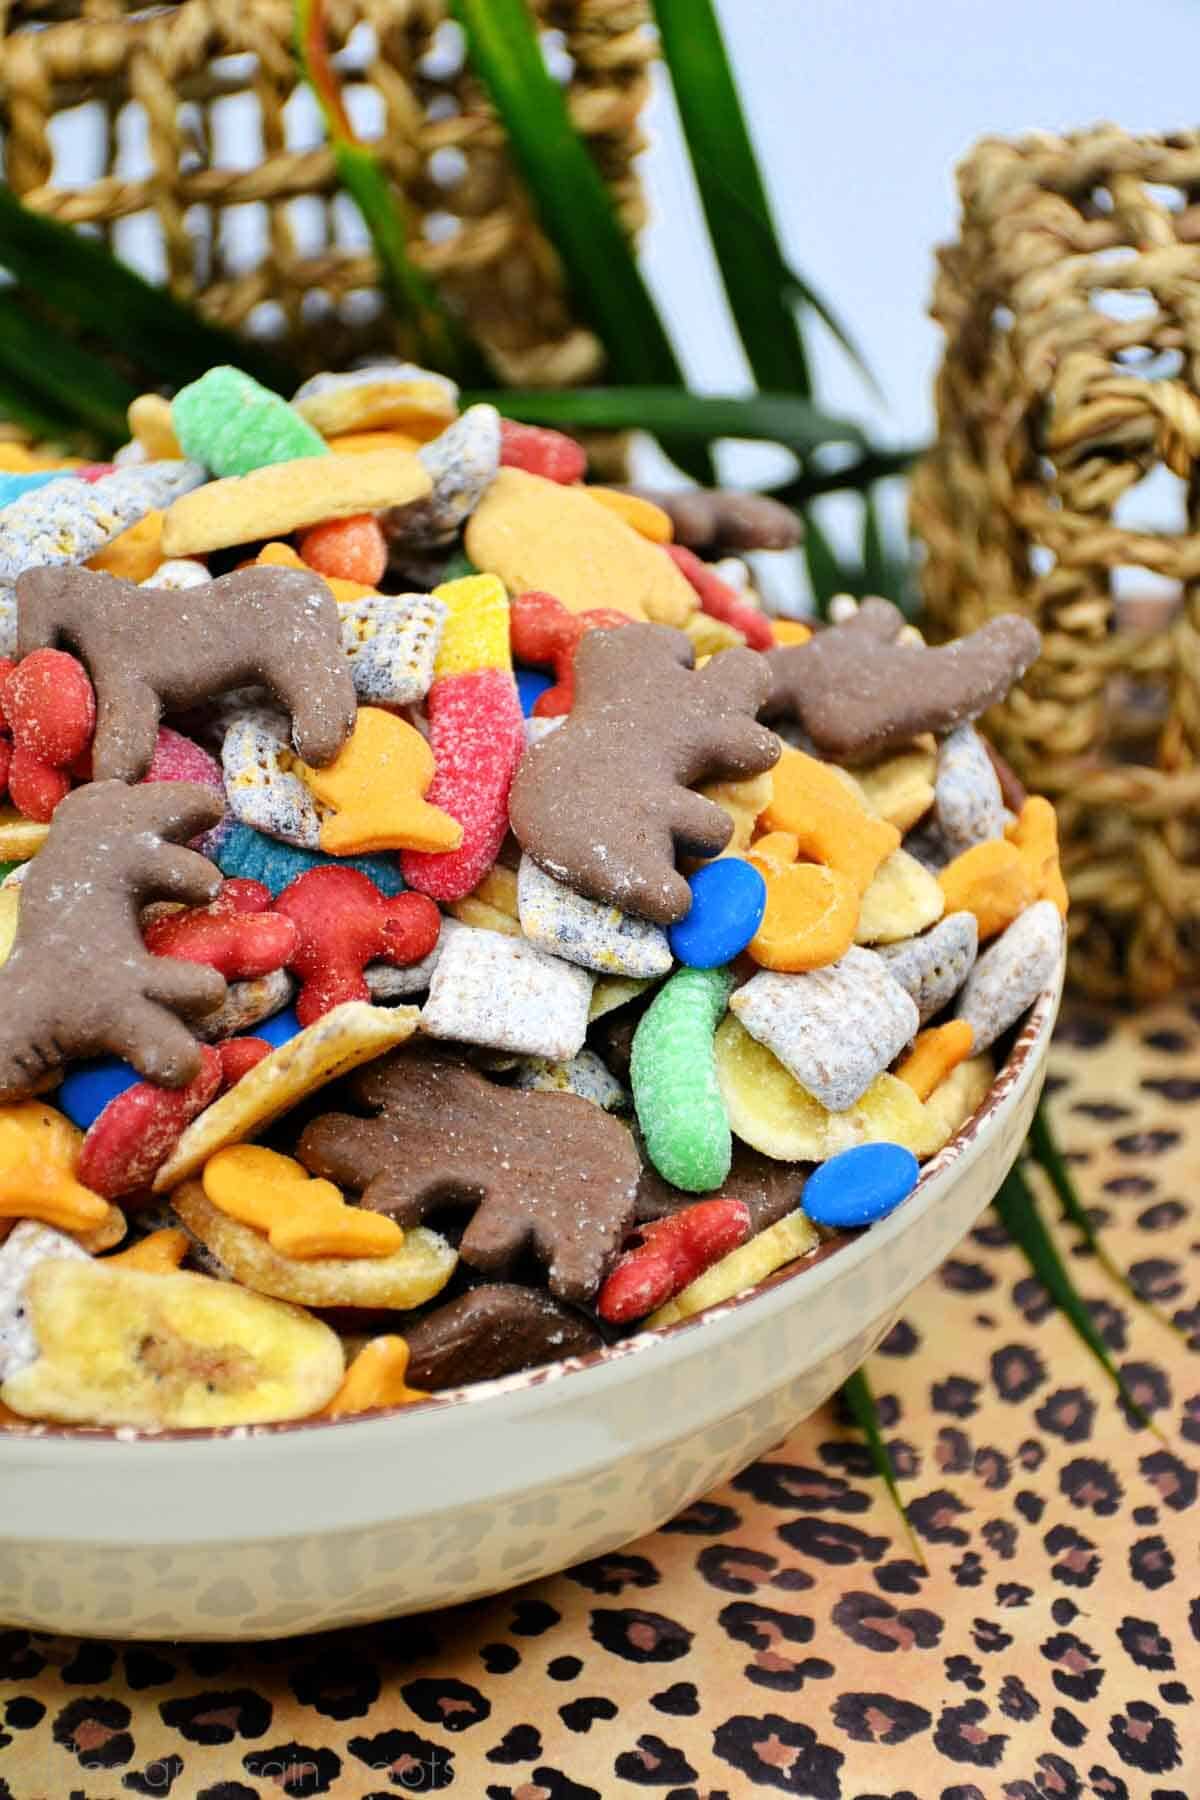 Vertical image of a cheetah print background with wicker baskets and leaves showing a colorful, fun safari Jungle Cruise snack mix treat in a white bowl.